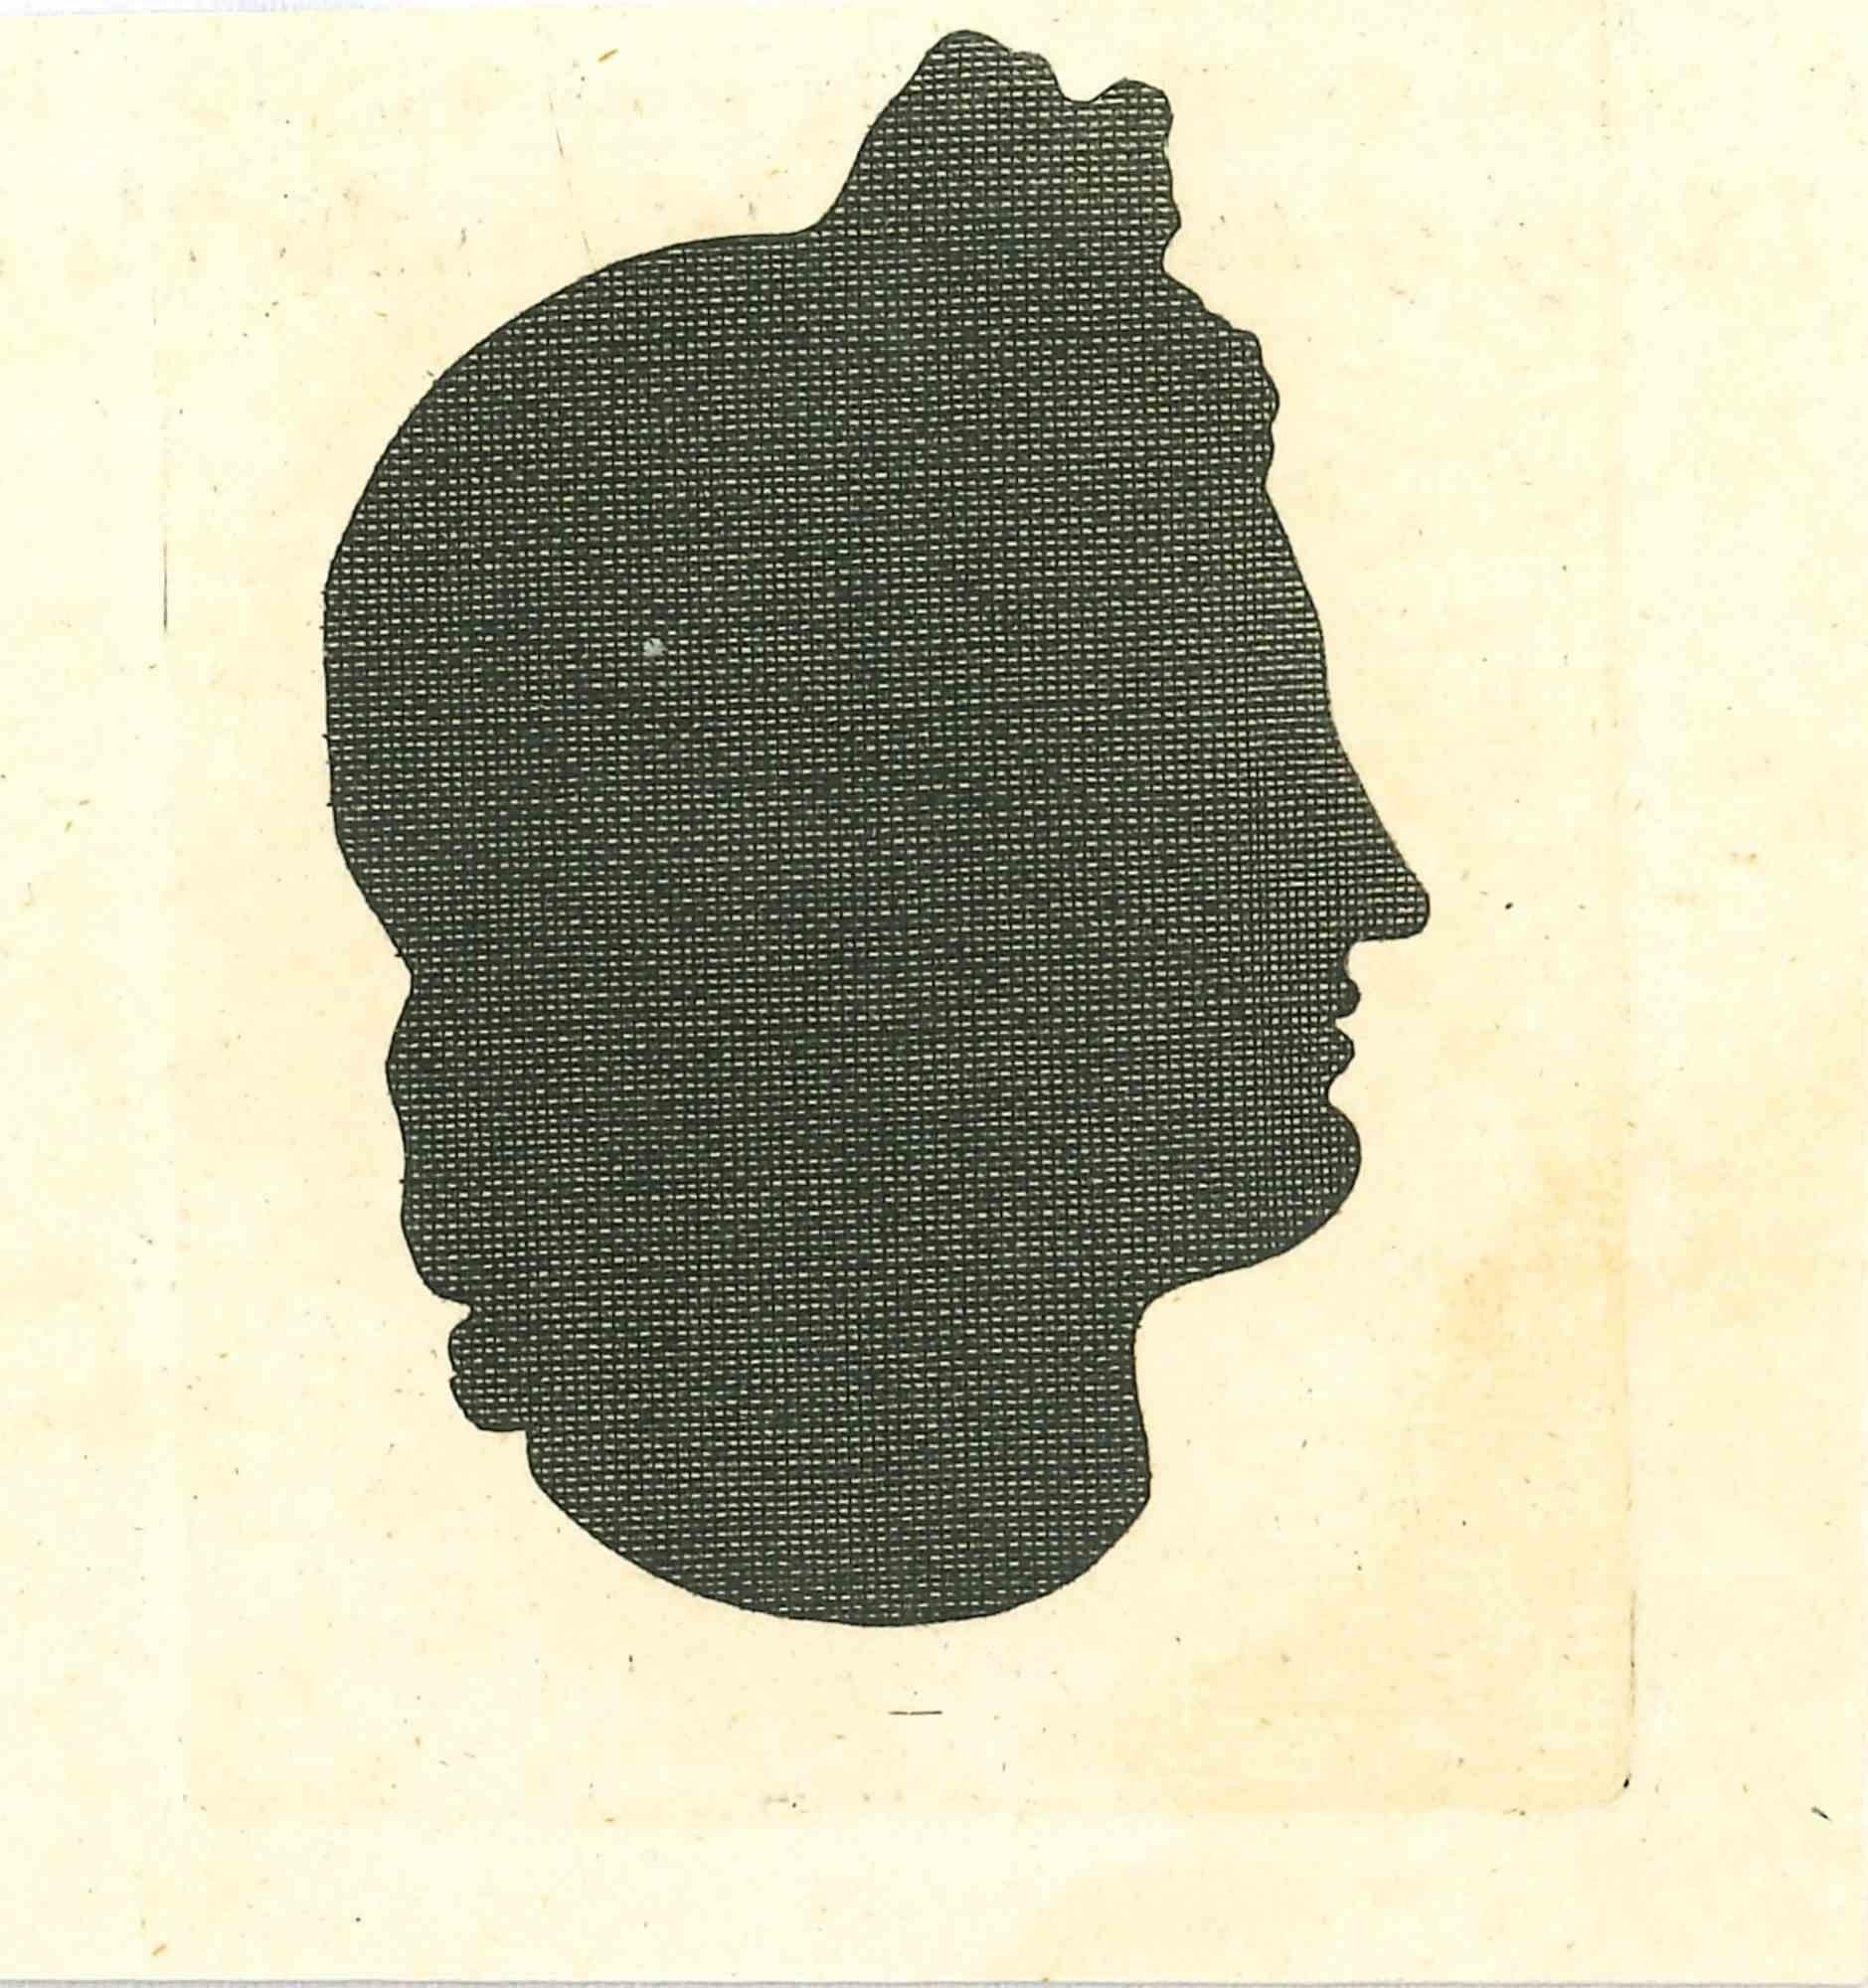 The Physiognomy - The Silhouette  Profile is an original etching artwork realized by Thomas Holloway for Johann Caspar Lavater's "Essays on Physiognomy, Designed to Promote the Knowledge and the Love of Mankind", London, Bensley, 1810. 

With the